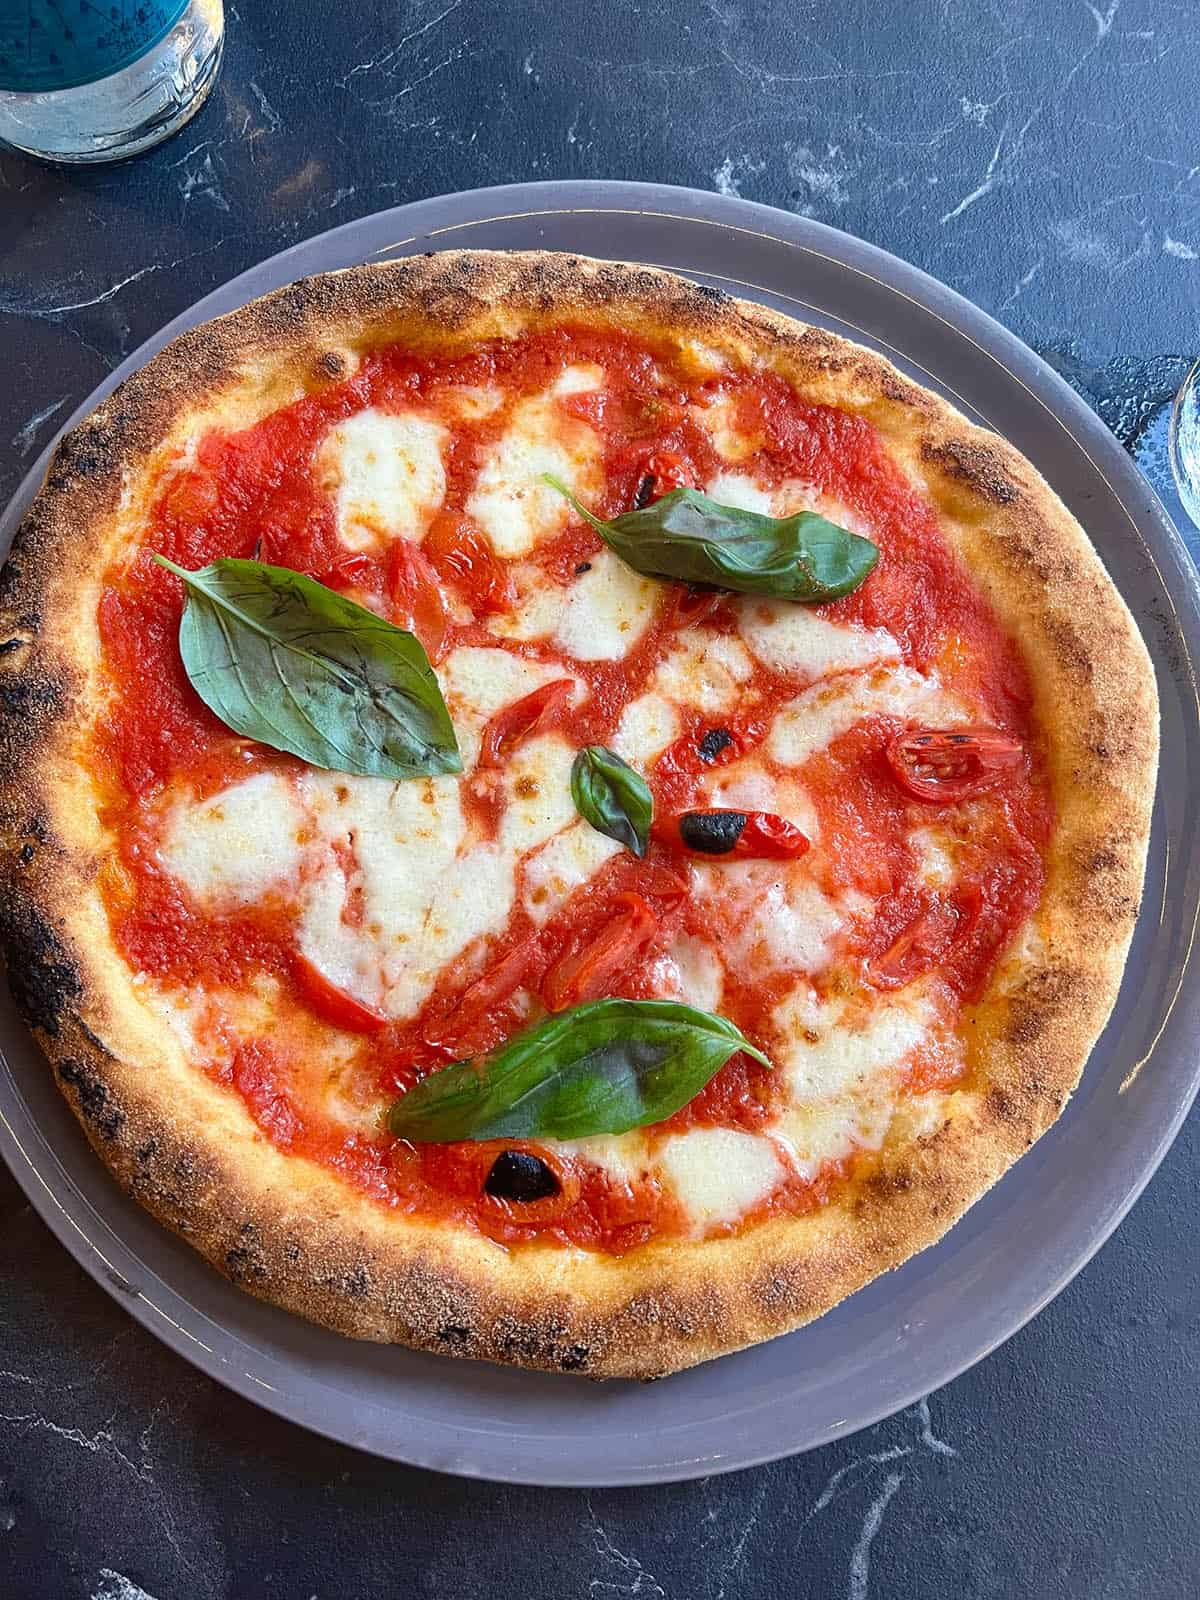 An image of a gluten free margherita pizza on a dark blue table with basil on top from Mastunicola in Palermo, Sicily